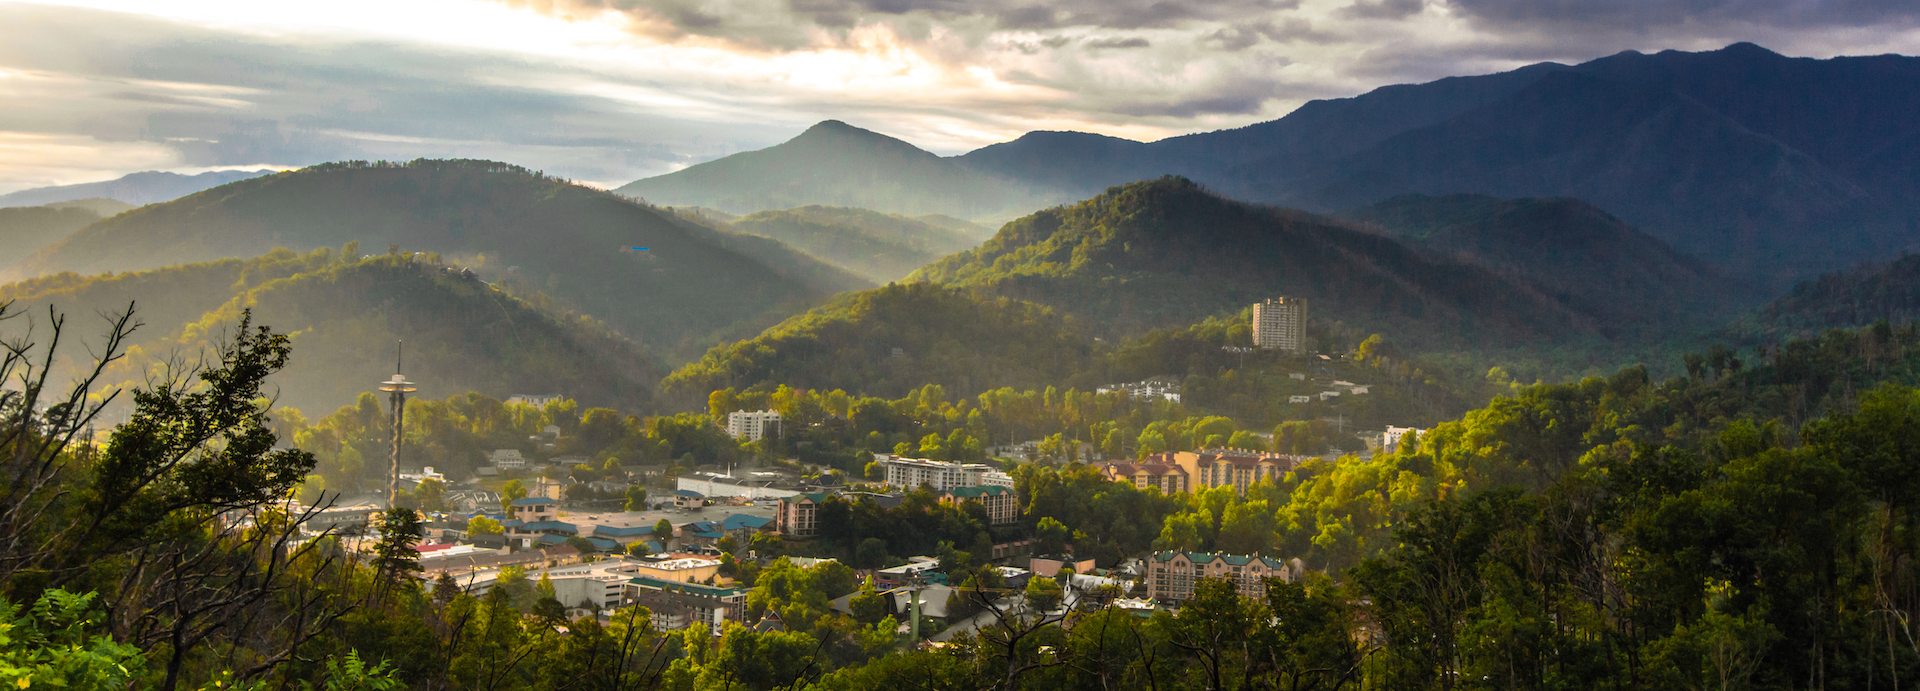 Great Smoky Mountain Sunrise Over The City Of Gatlinburg Tennessee